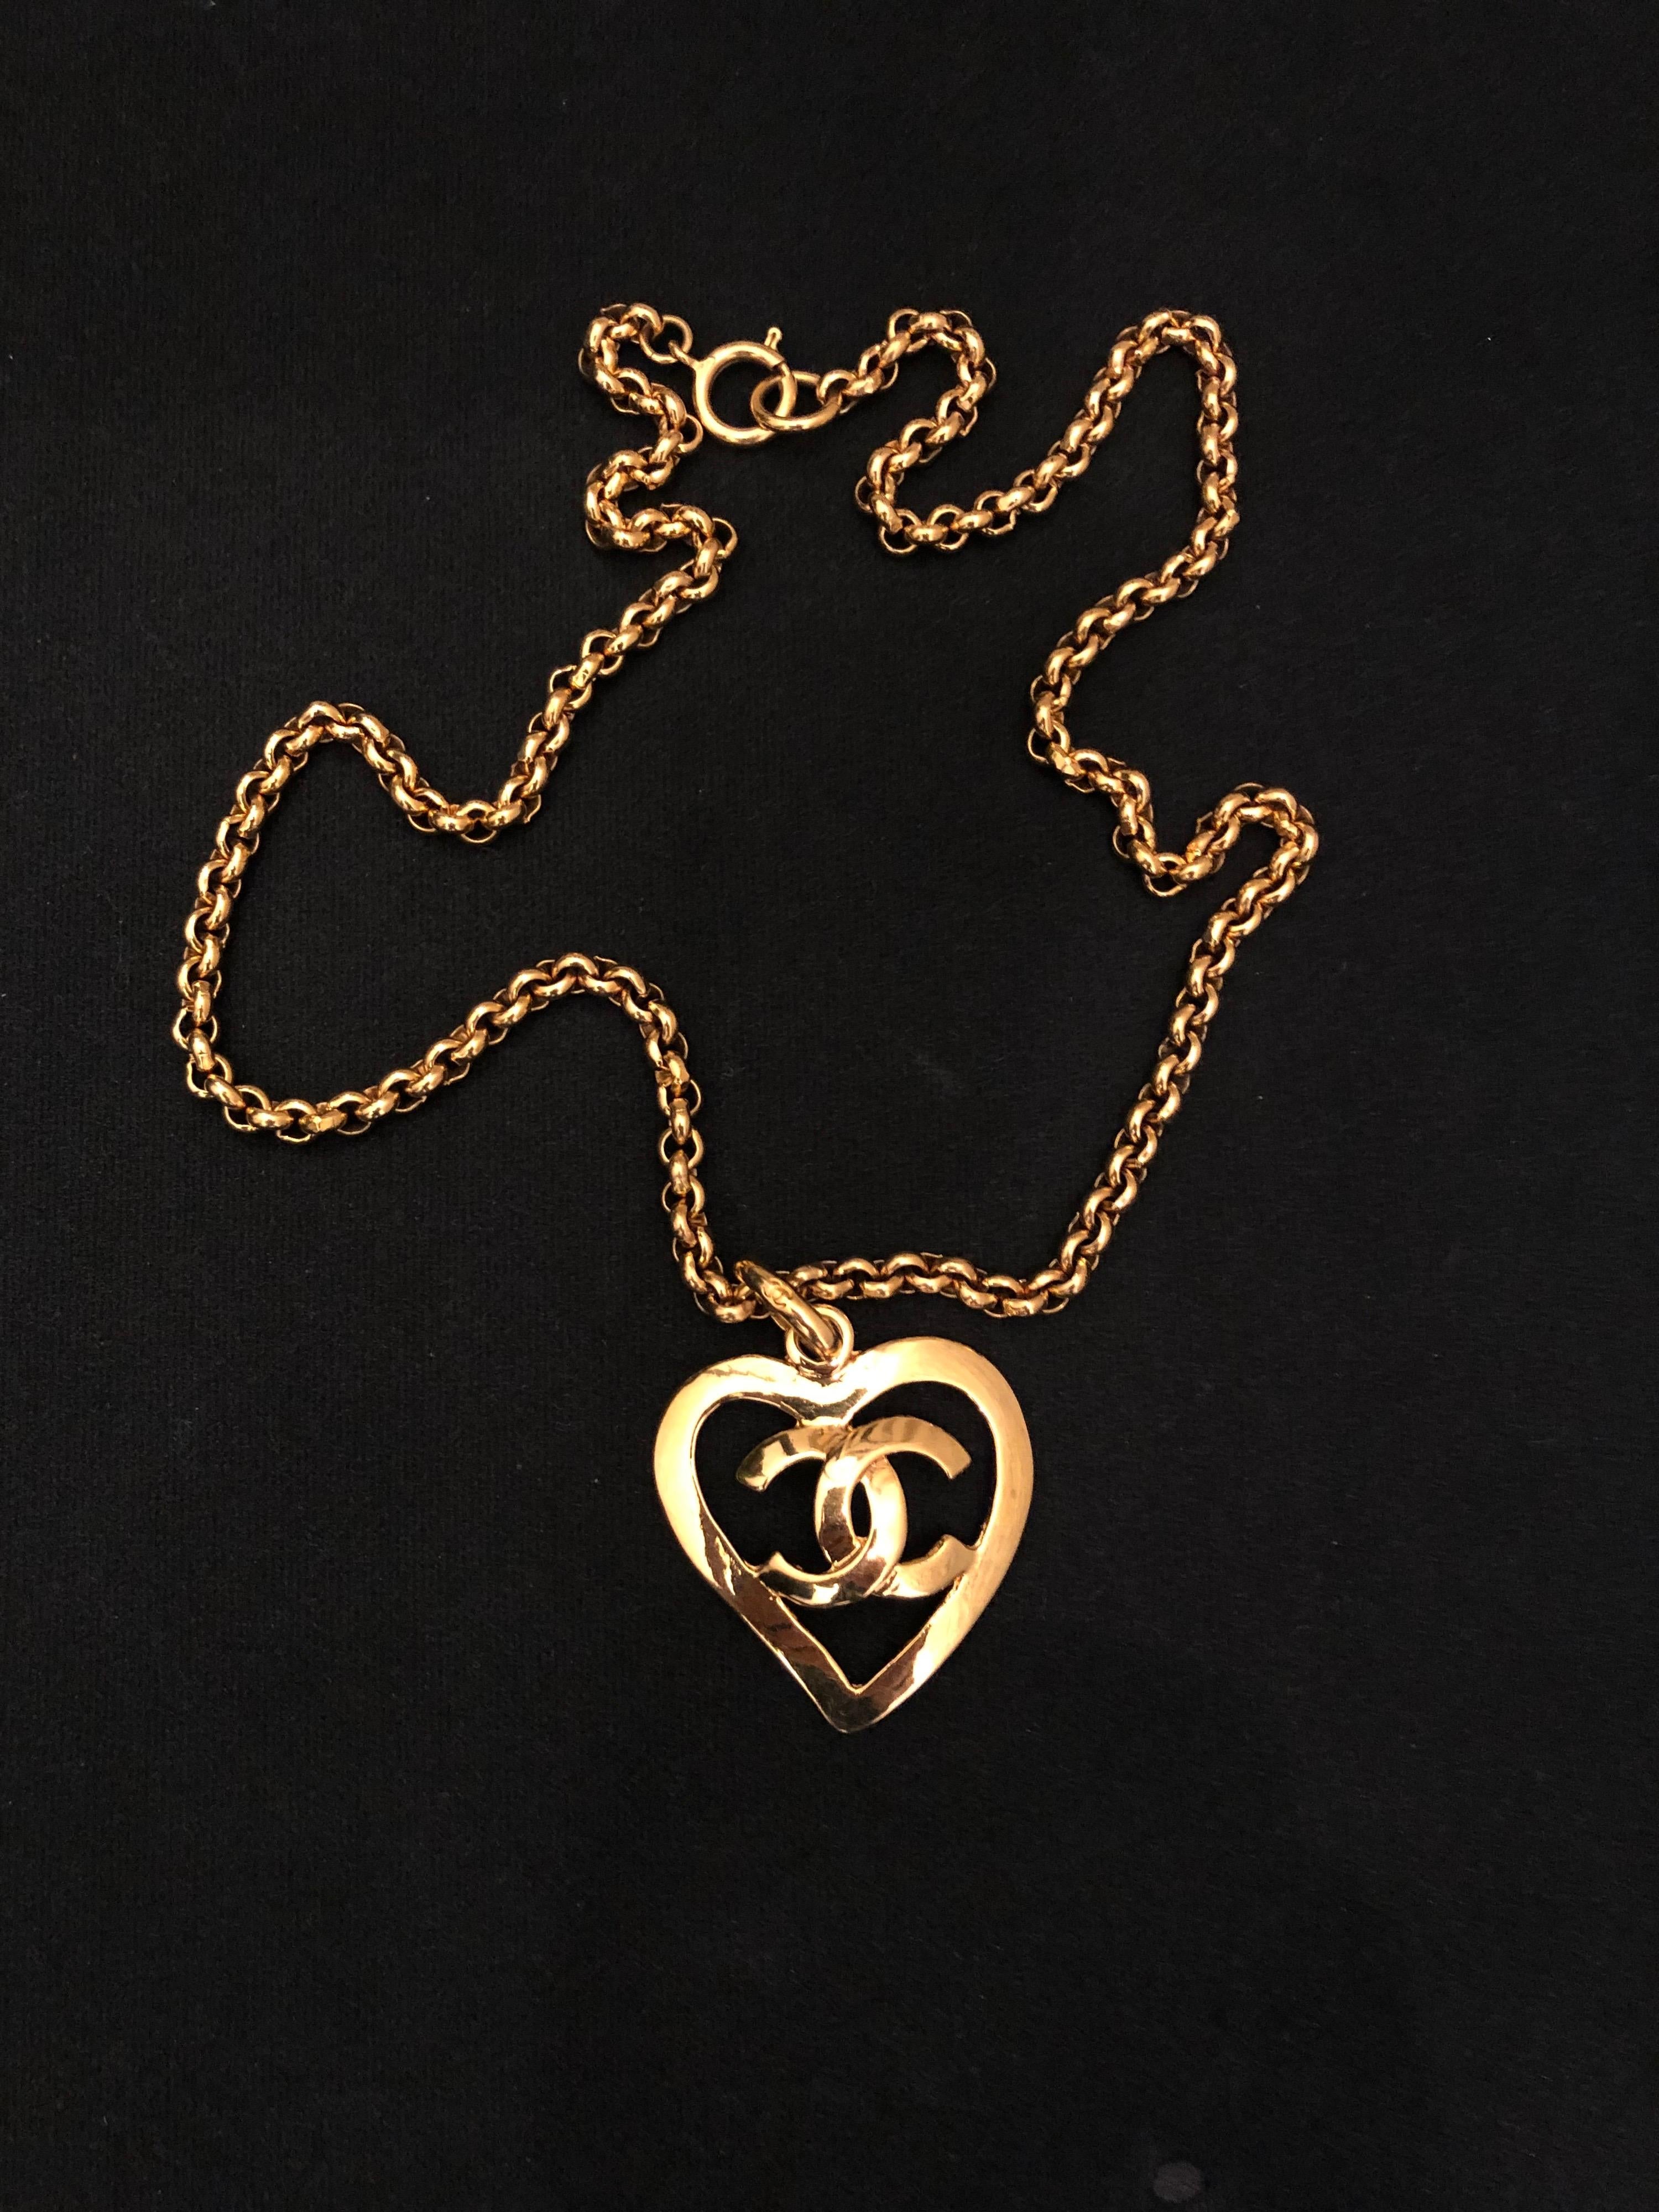 1990s Chanel gold toned chain necklace featuring a gold toned CC heart. Stamped Chanel 95P. Spring ring closure. Measures 58 cm Heart 4.4 x 4.0 cm. Come with box. 

Condition - Minor signs of wear. Generally in good condition. 